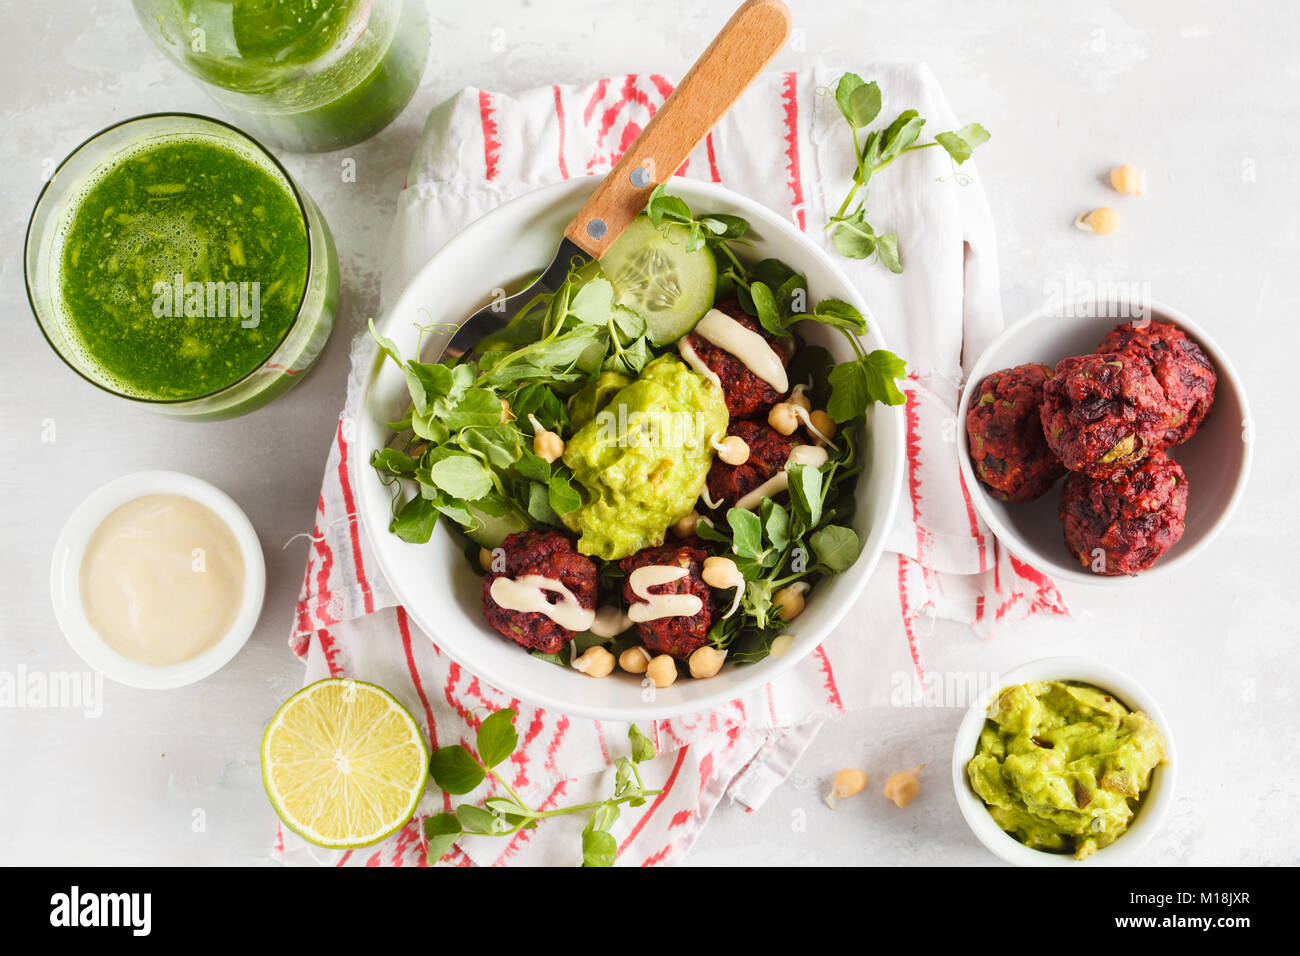 Green vegetable vegan salad with beets meatballs, Guacamole and tahini dressing. Healthy vegetarian food concept. Copy space Stock Photo